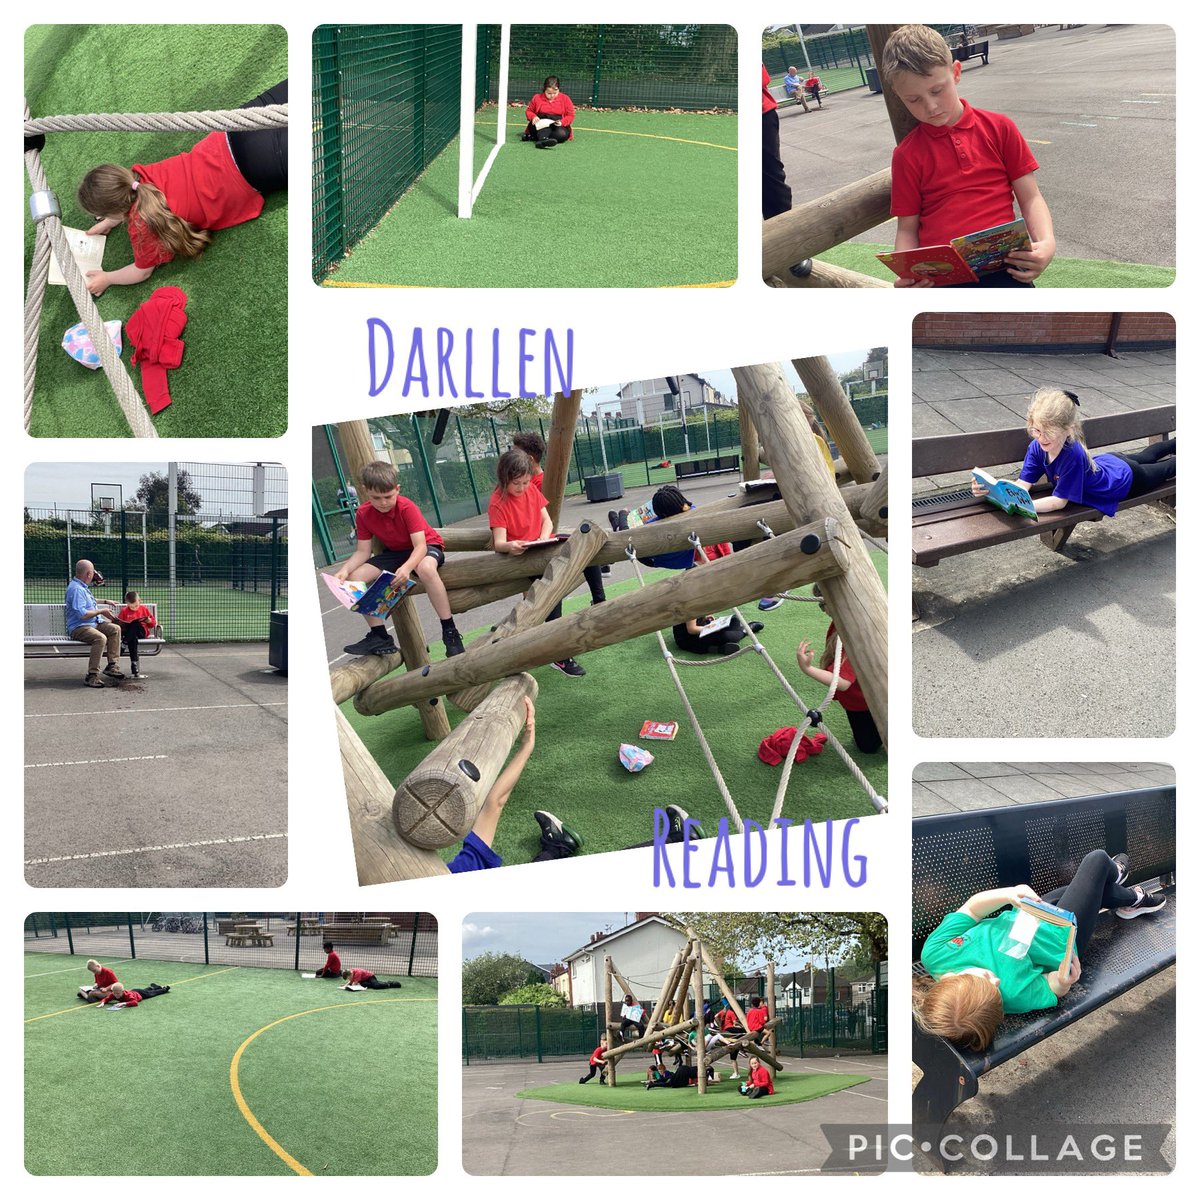 We often talk about seizing the moments,making the most of the opportunities.Today we took our reading outside in #year3 and the children really enjoyed getting comfy and reading their books.They’ve asked to do it again! *cue everyone doing the sun dance!